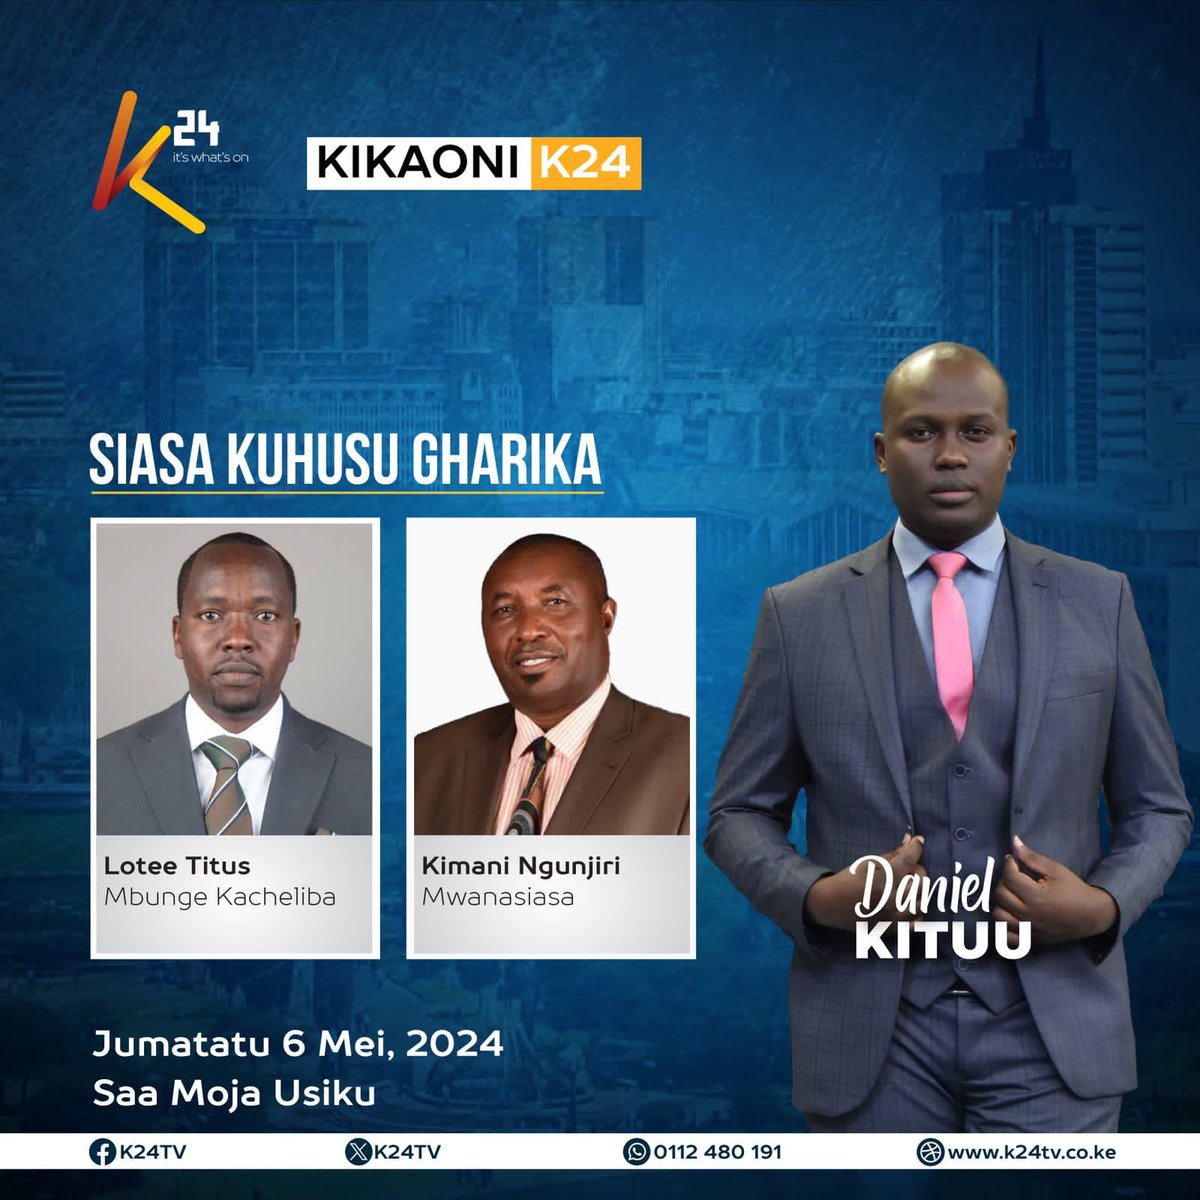 Hon. @kimaningunjiri will be in K24 Tv tonight . Tune in and be part of the substantial discussion on the climacteric debate on party politics. Don't miss the deciding discourse.